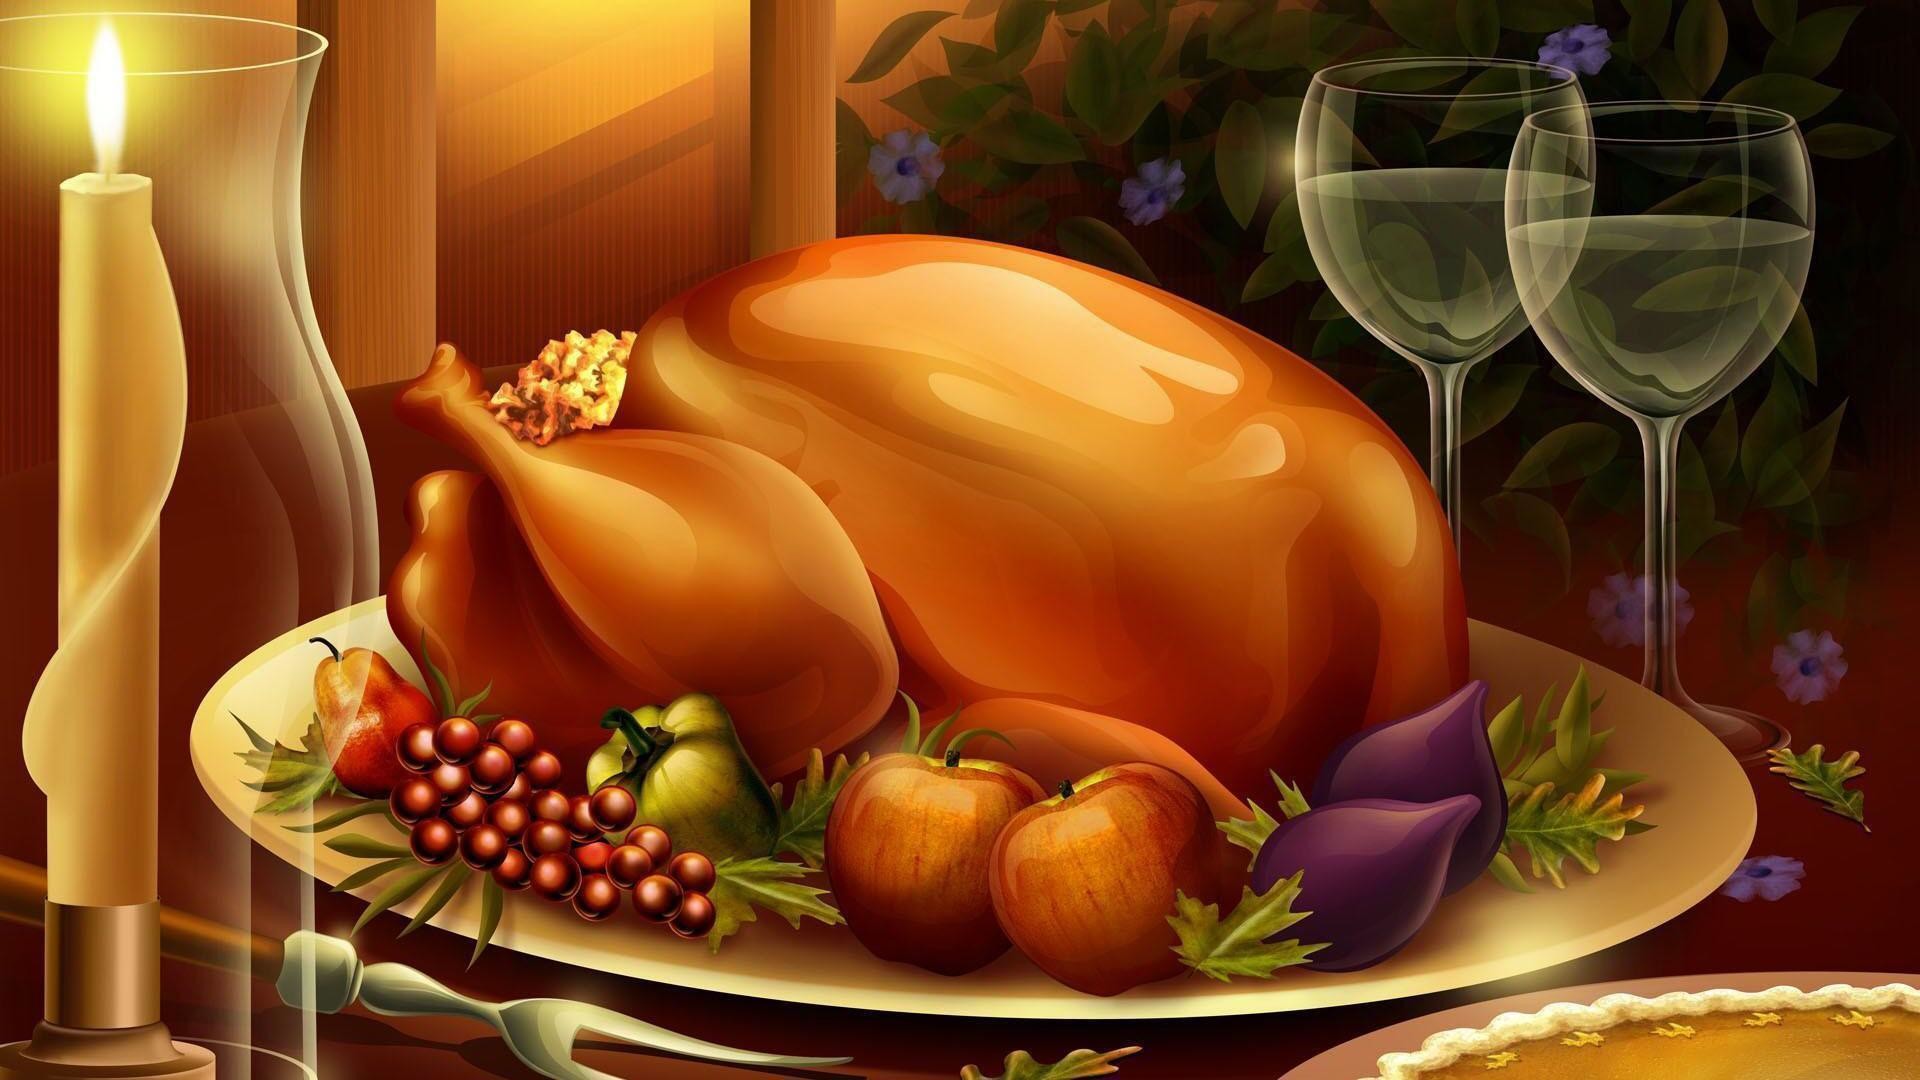 883,105 Thanksgiving Background Images, Stock Photos, 3D objects